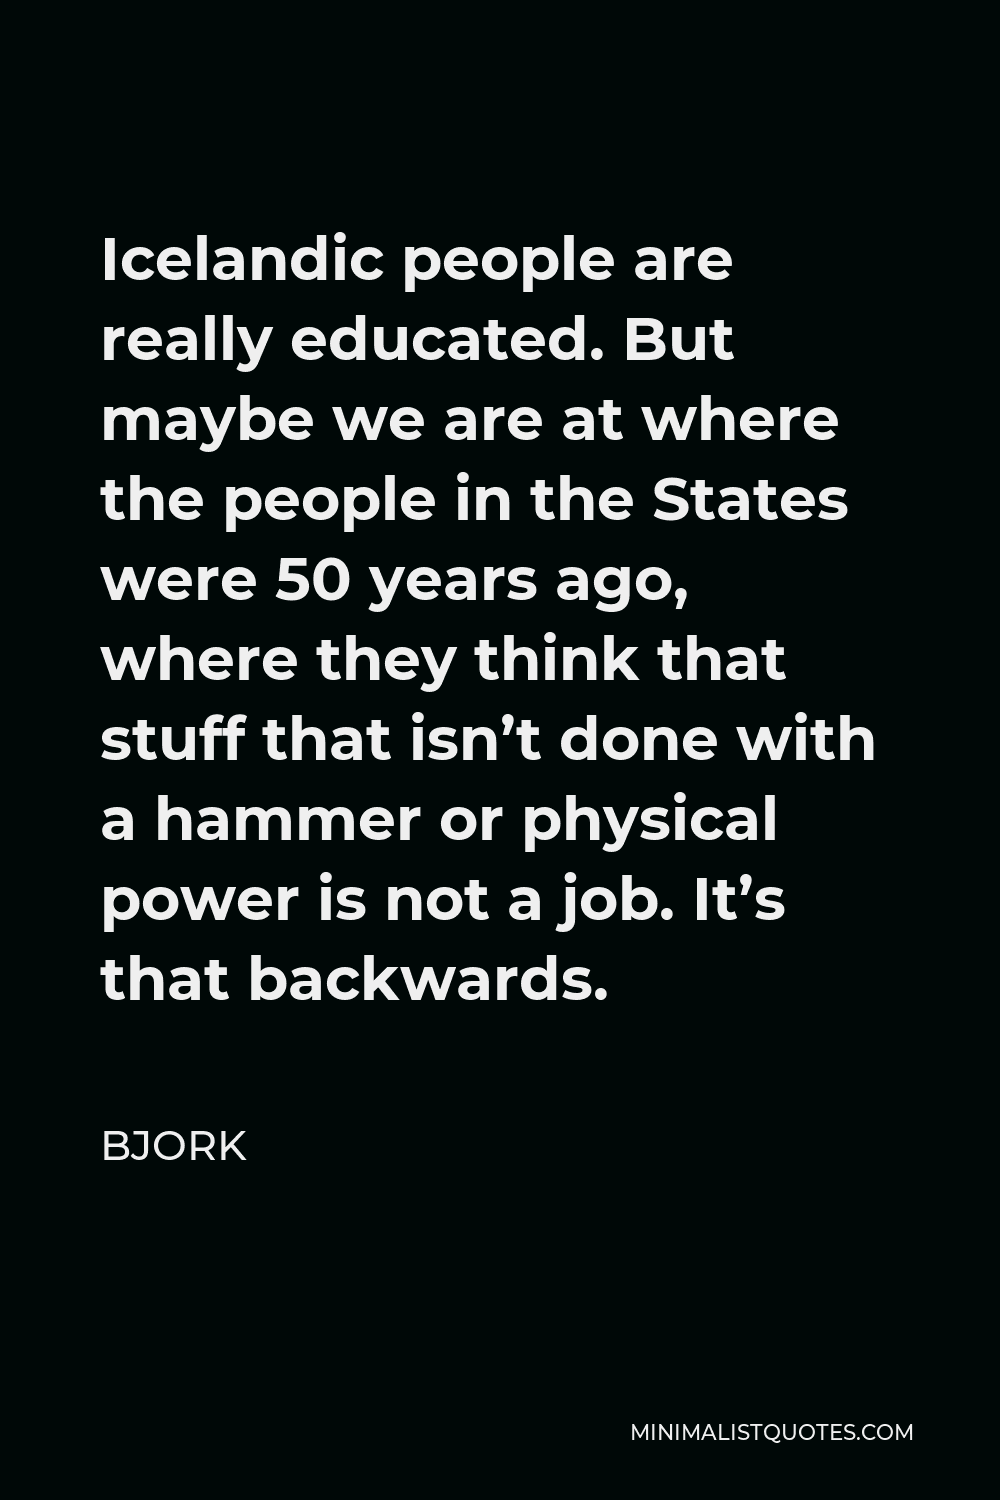 Bjork Quote - Icelandic people are really educated. But maybe we are at where the people in the States were 50 years ago, where they think that stuff that isn’t done with a hammer or physical power is not a job. It’s that backwards.